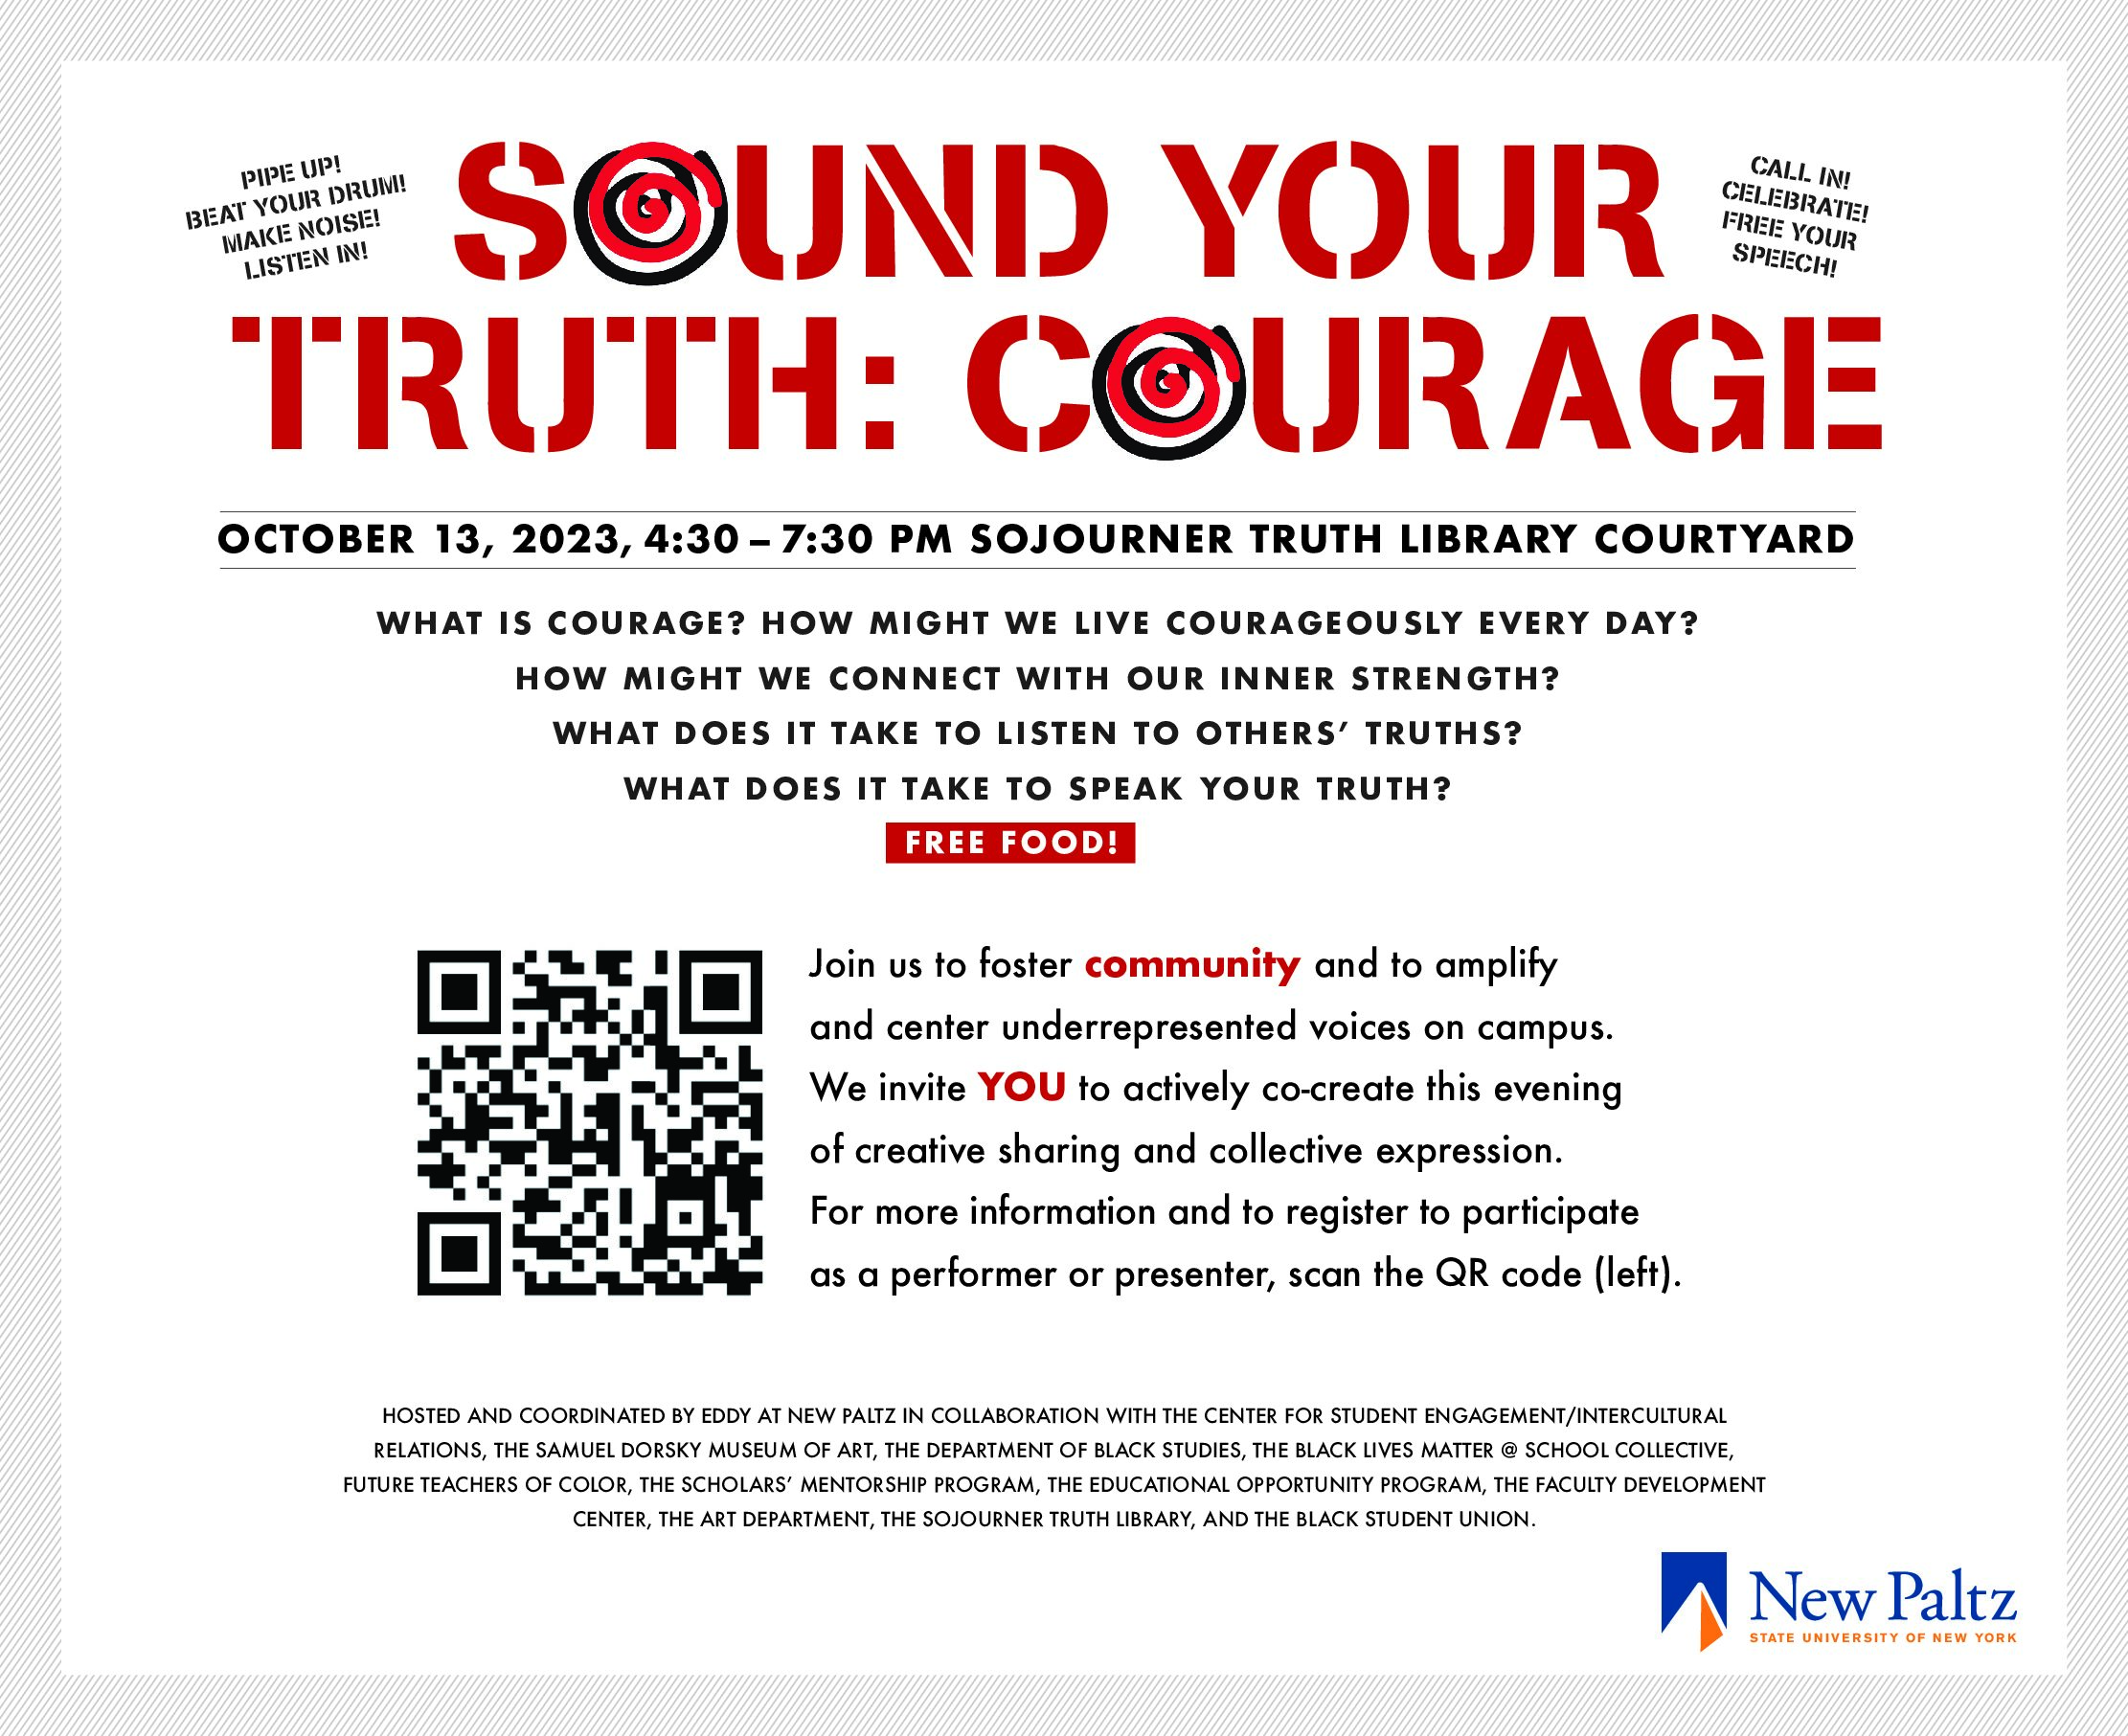 Sound Your Truth: Courage